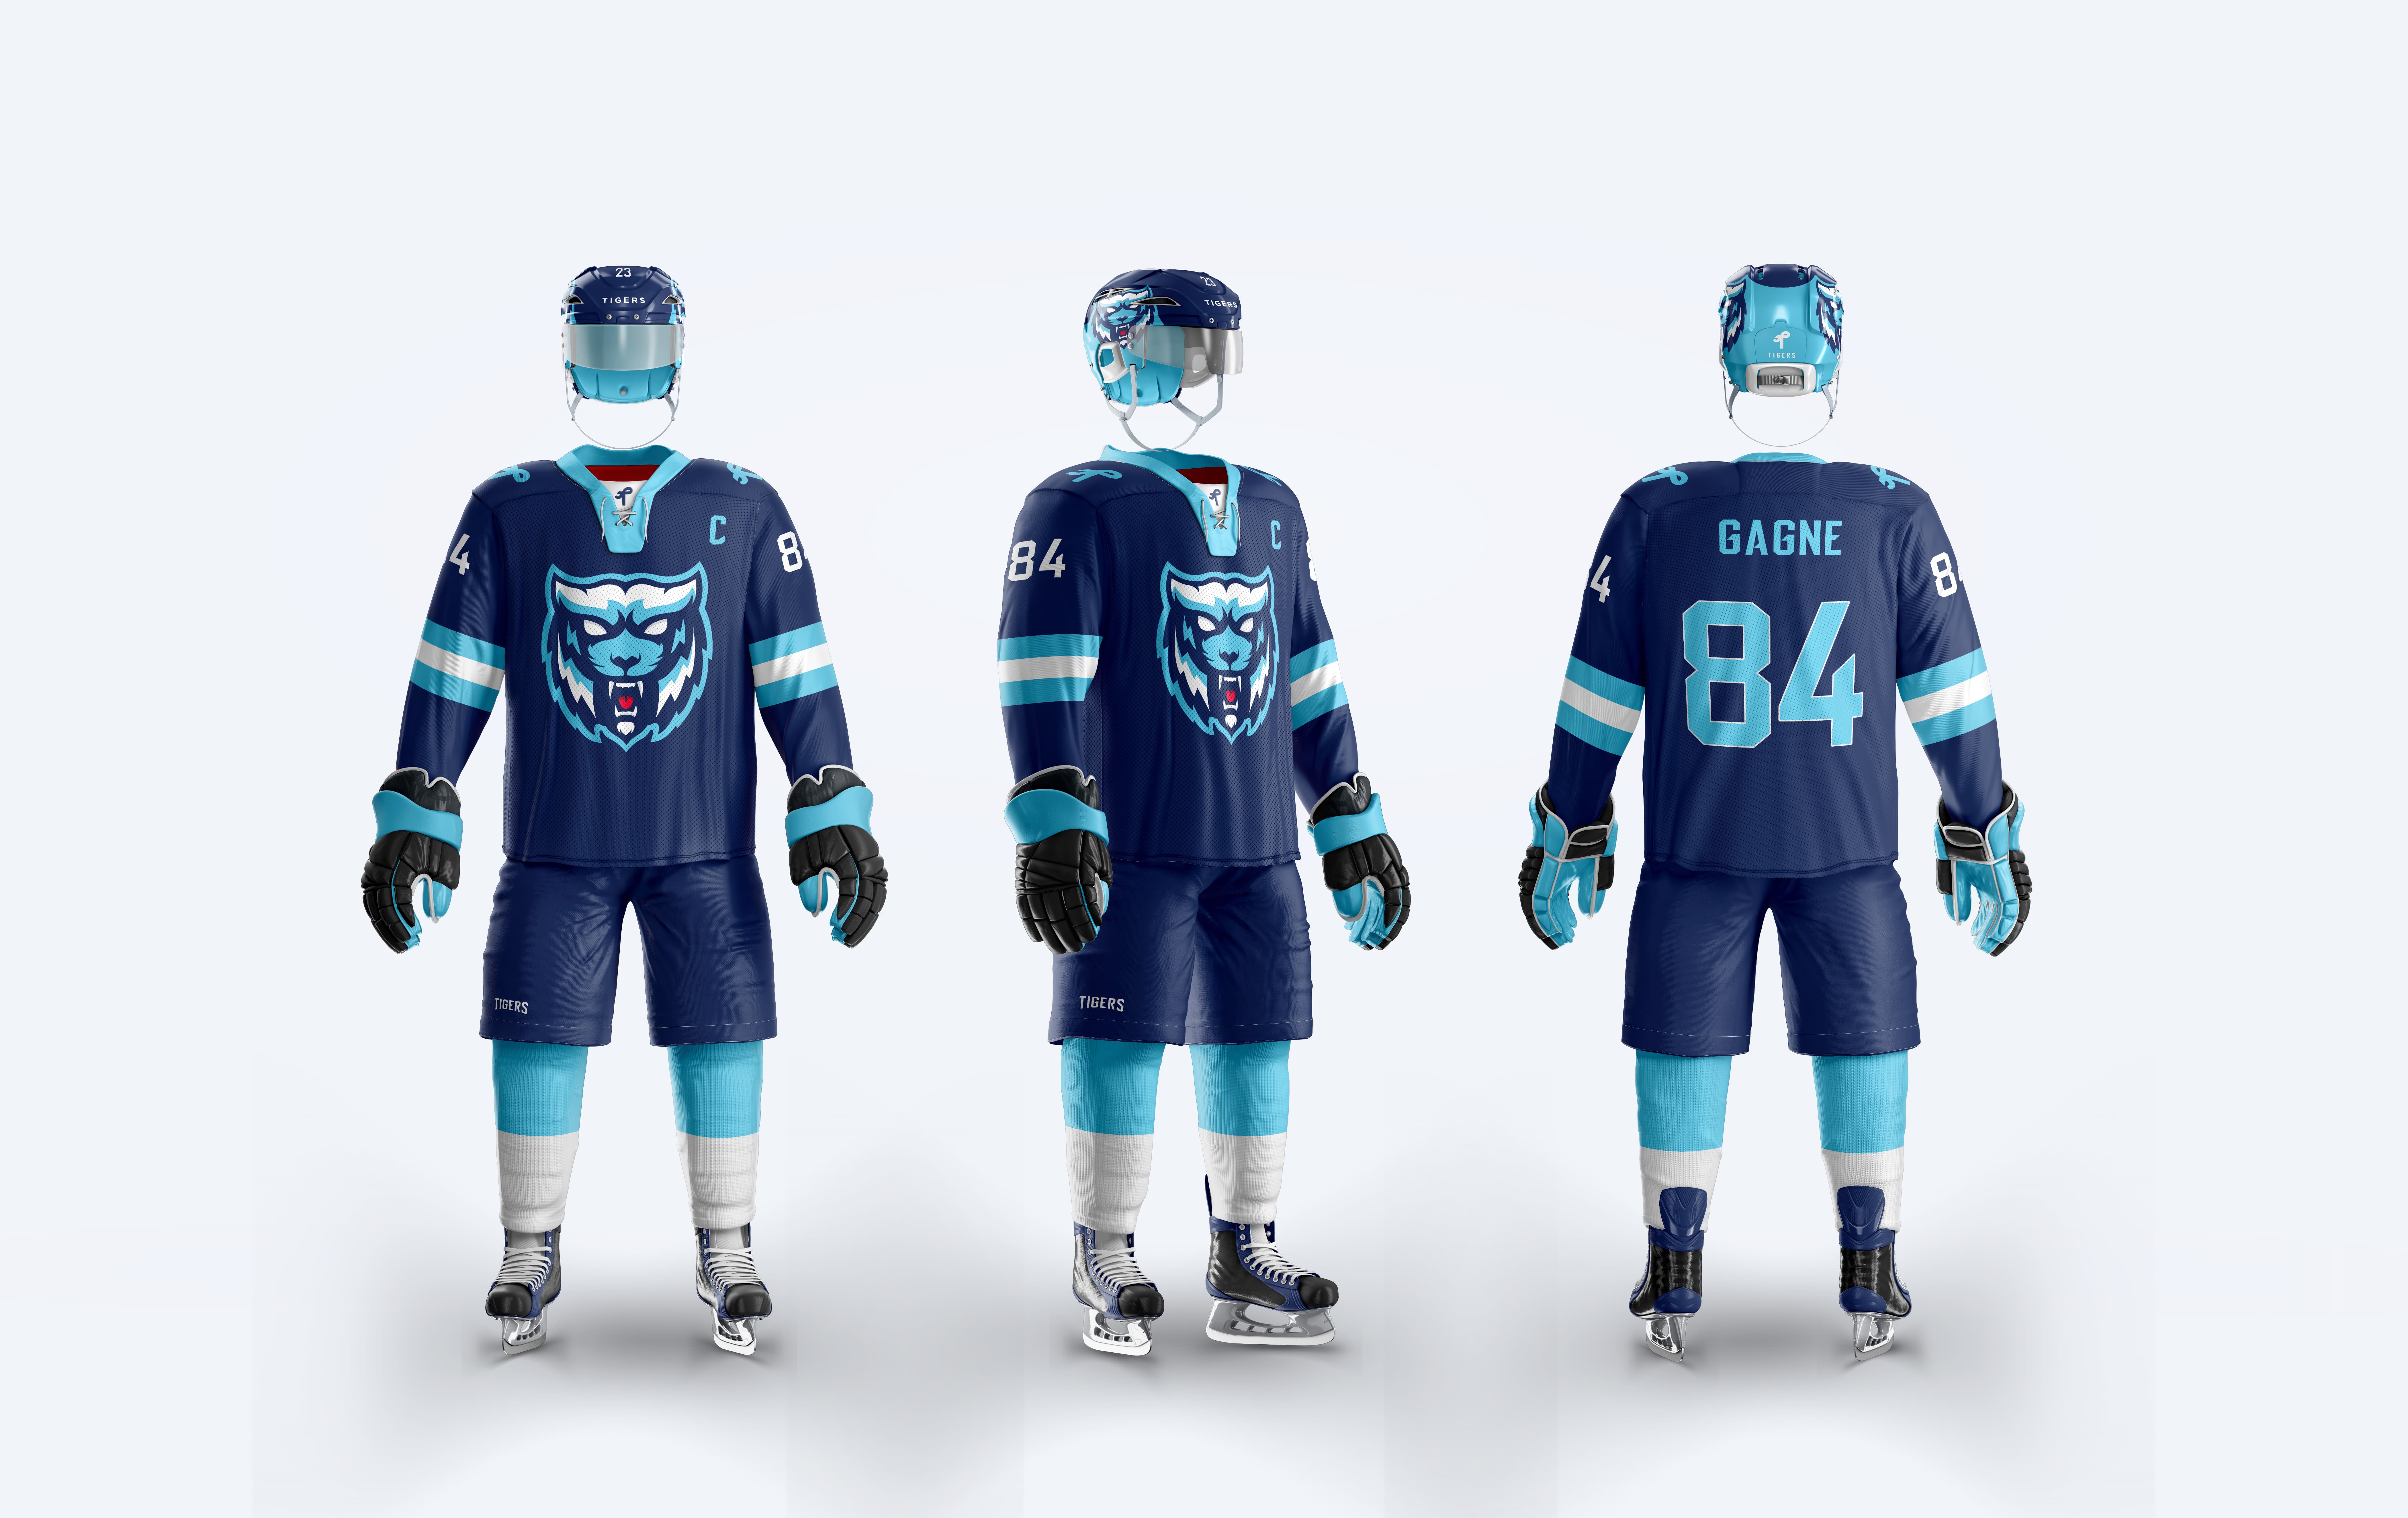 Hockey uniforms from three different angles